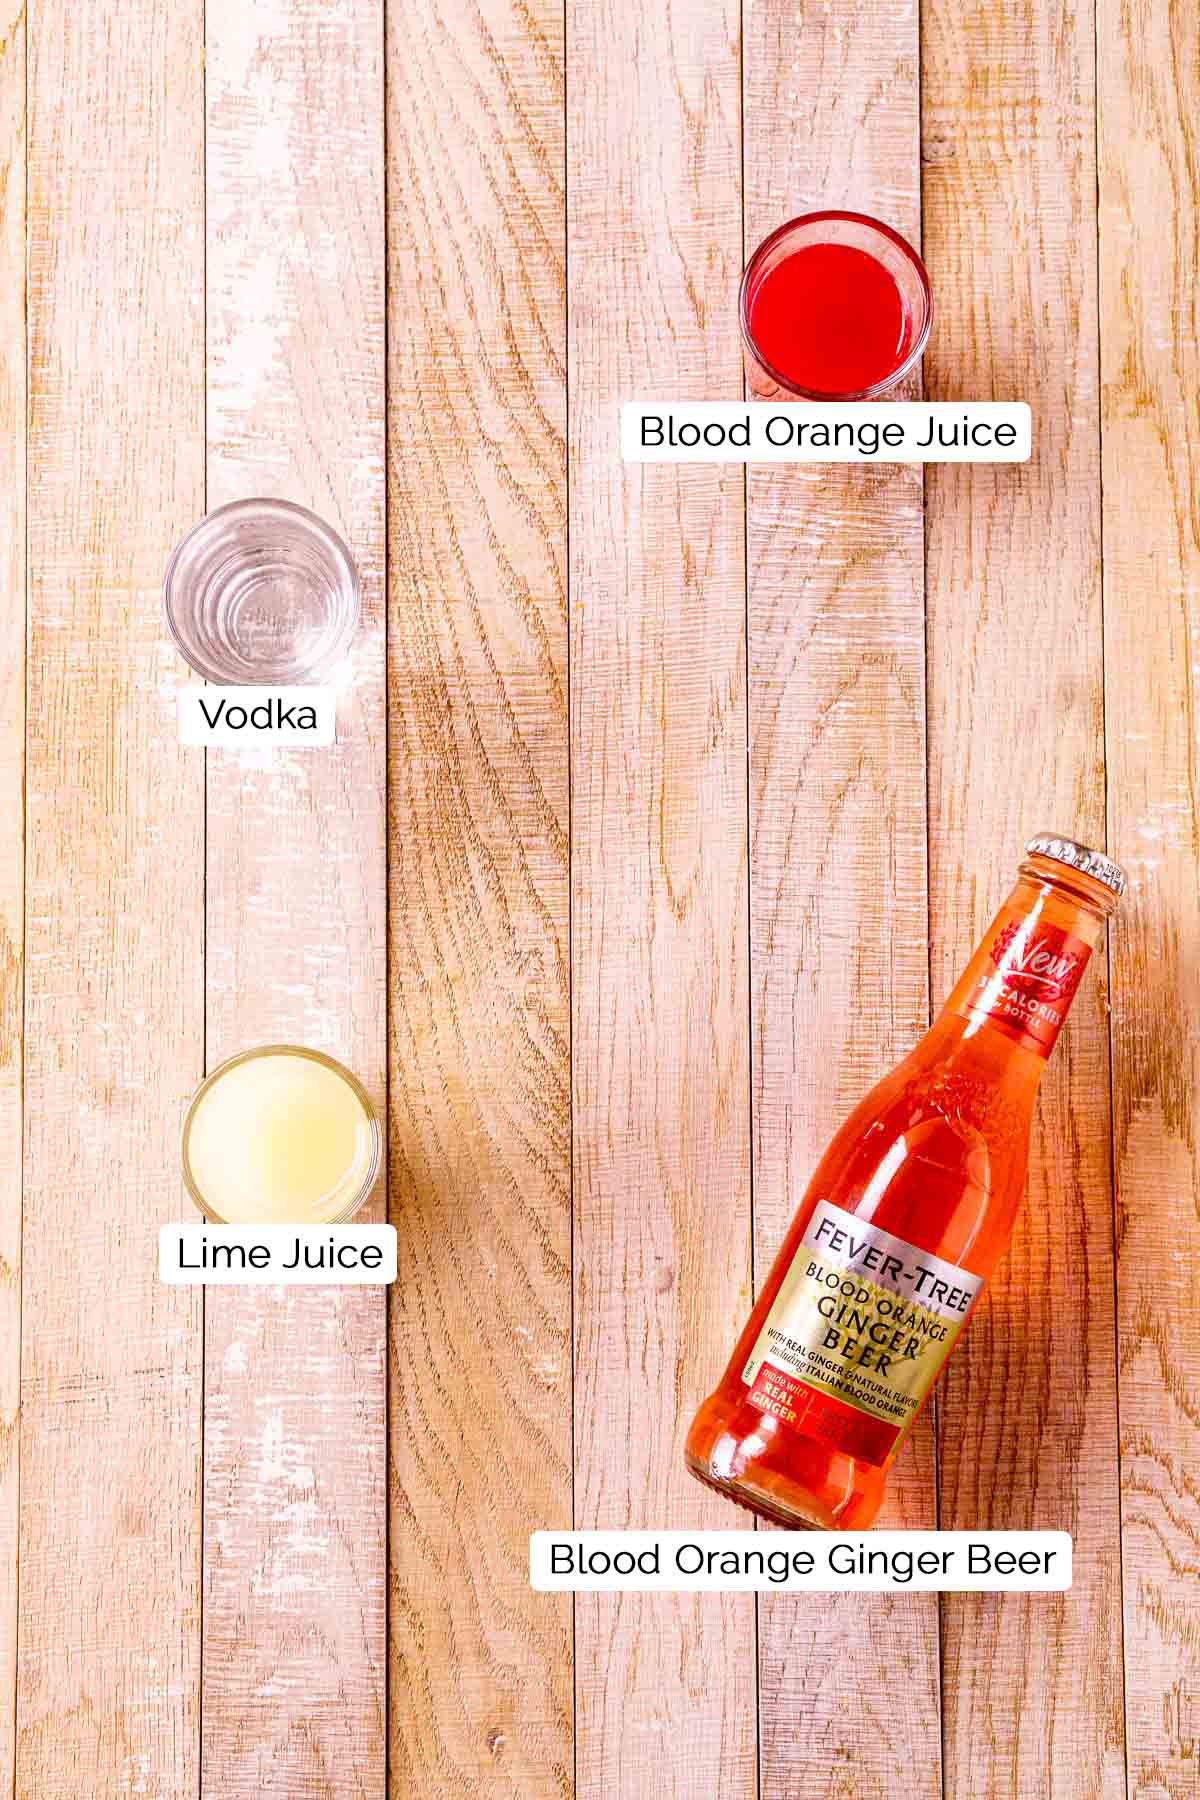 The drink ingredients on a cream-colored wooden surface with black and white labels underneath each item.